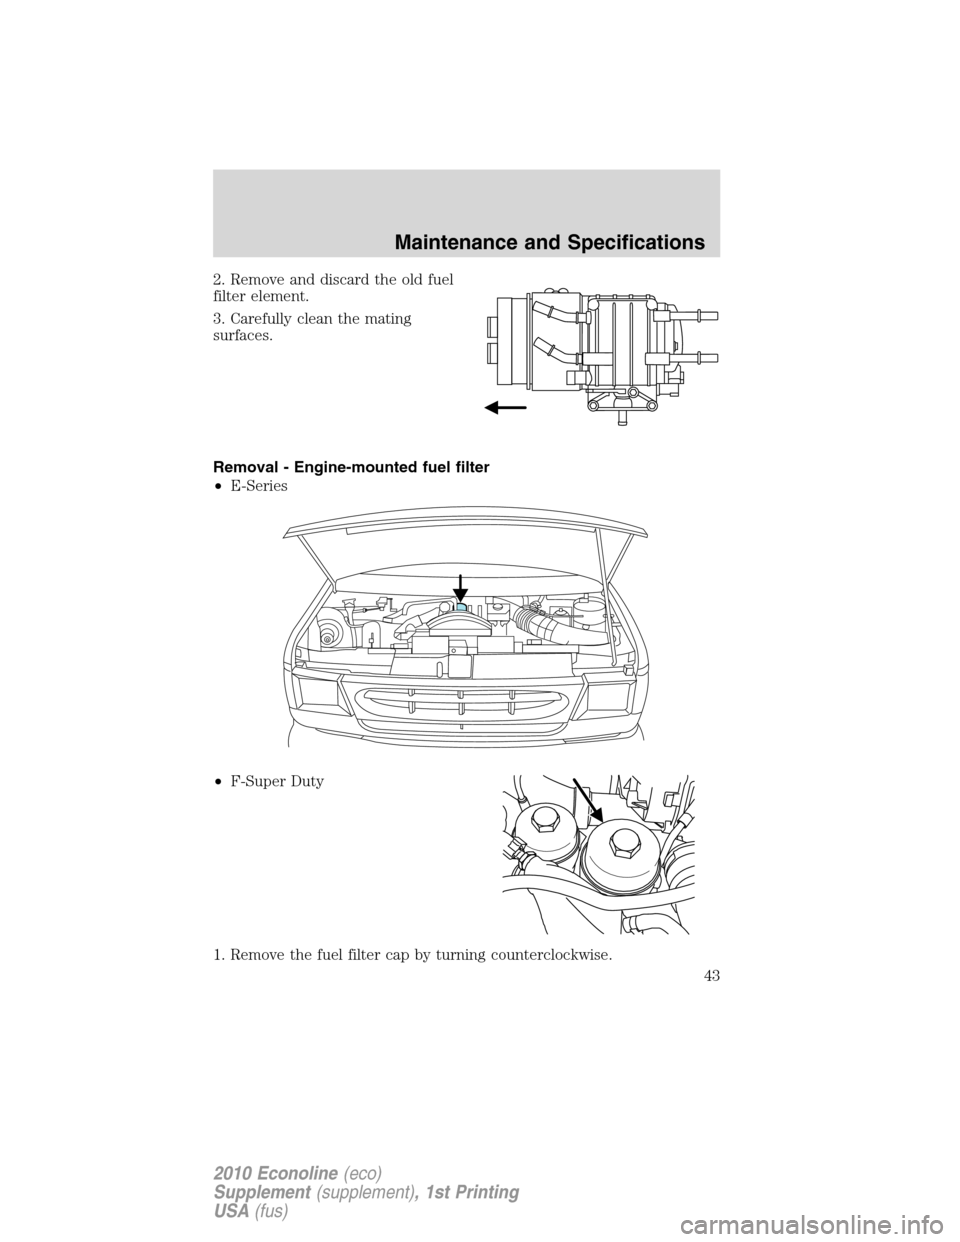 FORD SUPER DUTY 2010 2.G Diesel Supplement Manual 2. Remove and discard the old fuel
filter element.
3. Carefully clean the mating
surfaces.
Removal - Engine-mounted fuel filter
•E-Series
•F-Super Duty
1. Remove the fuel filter cap by turning cou